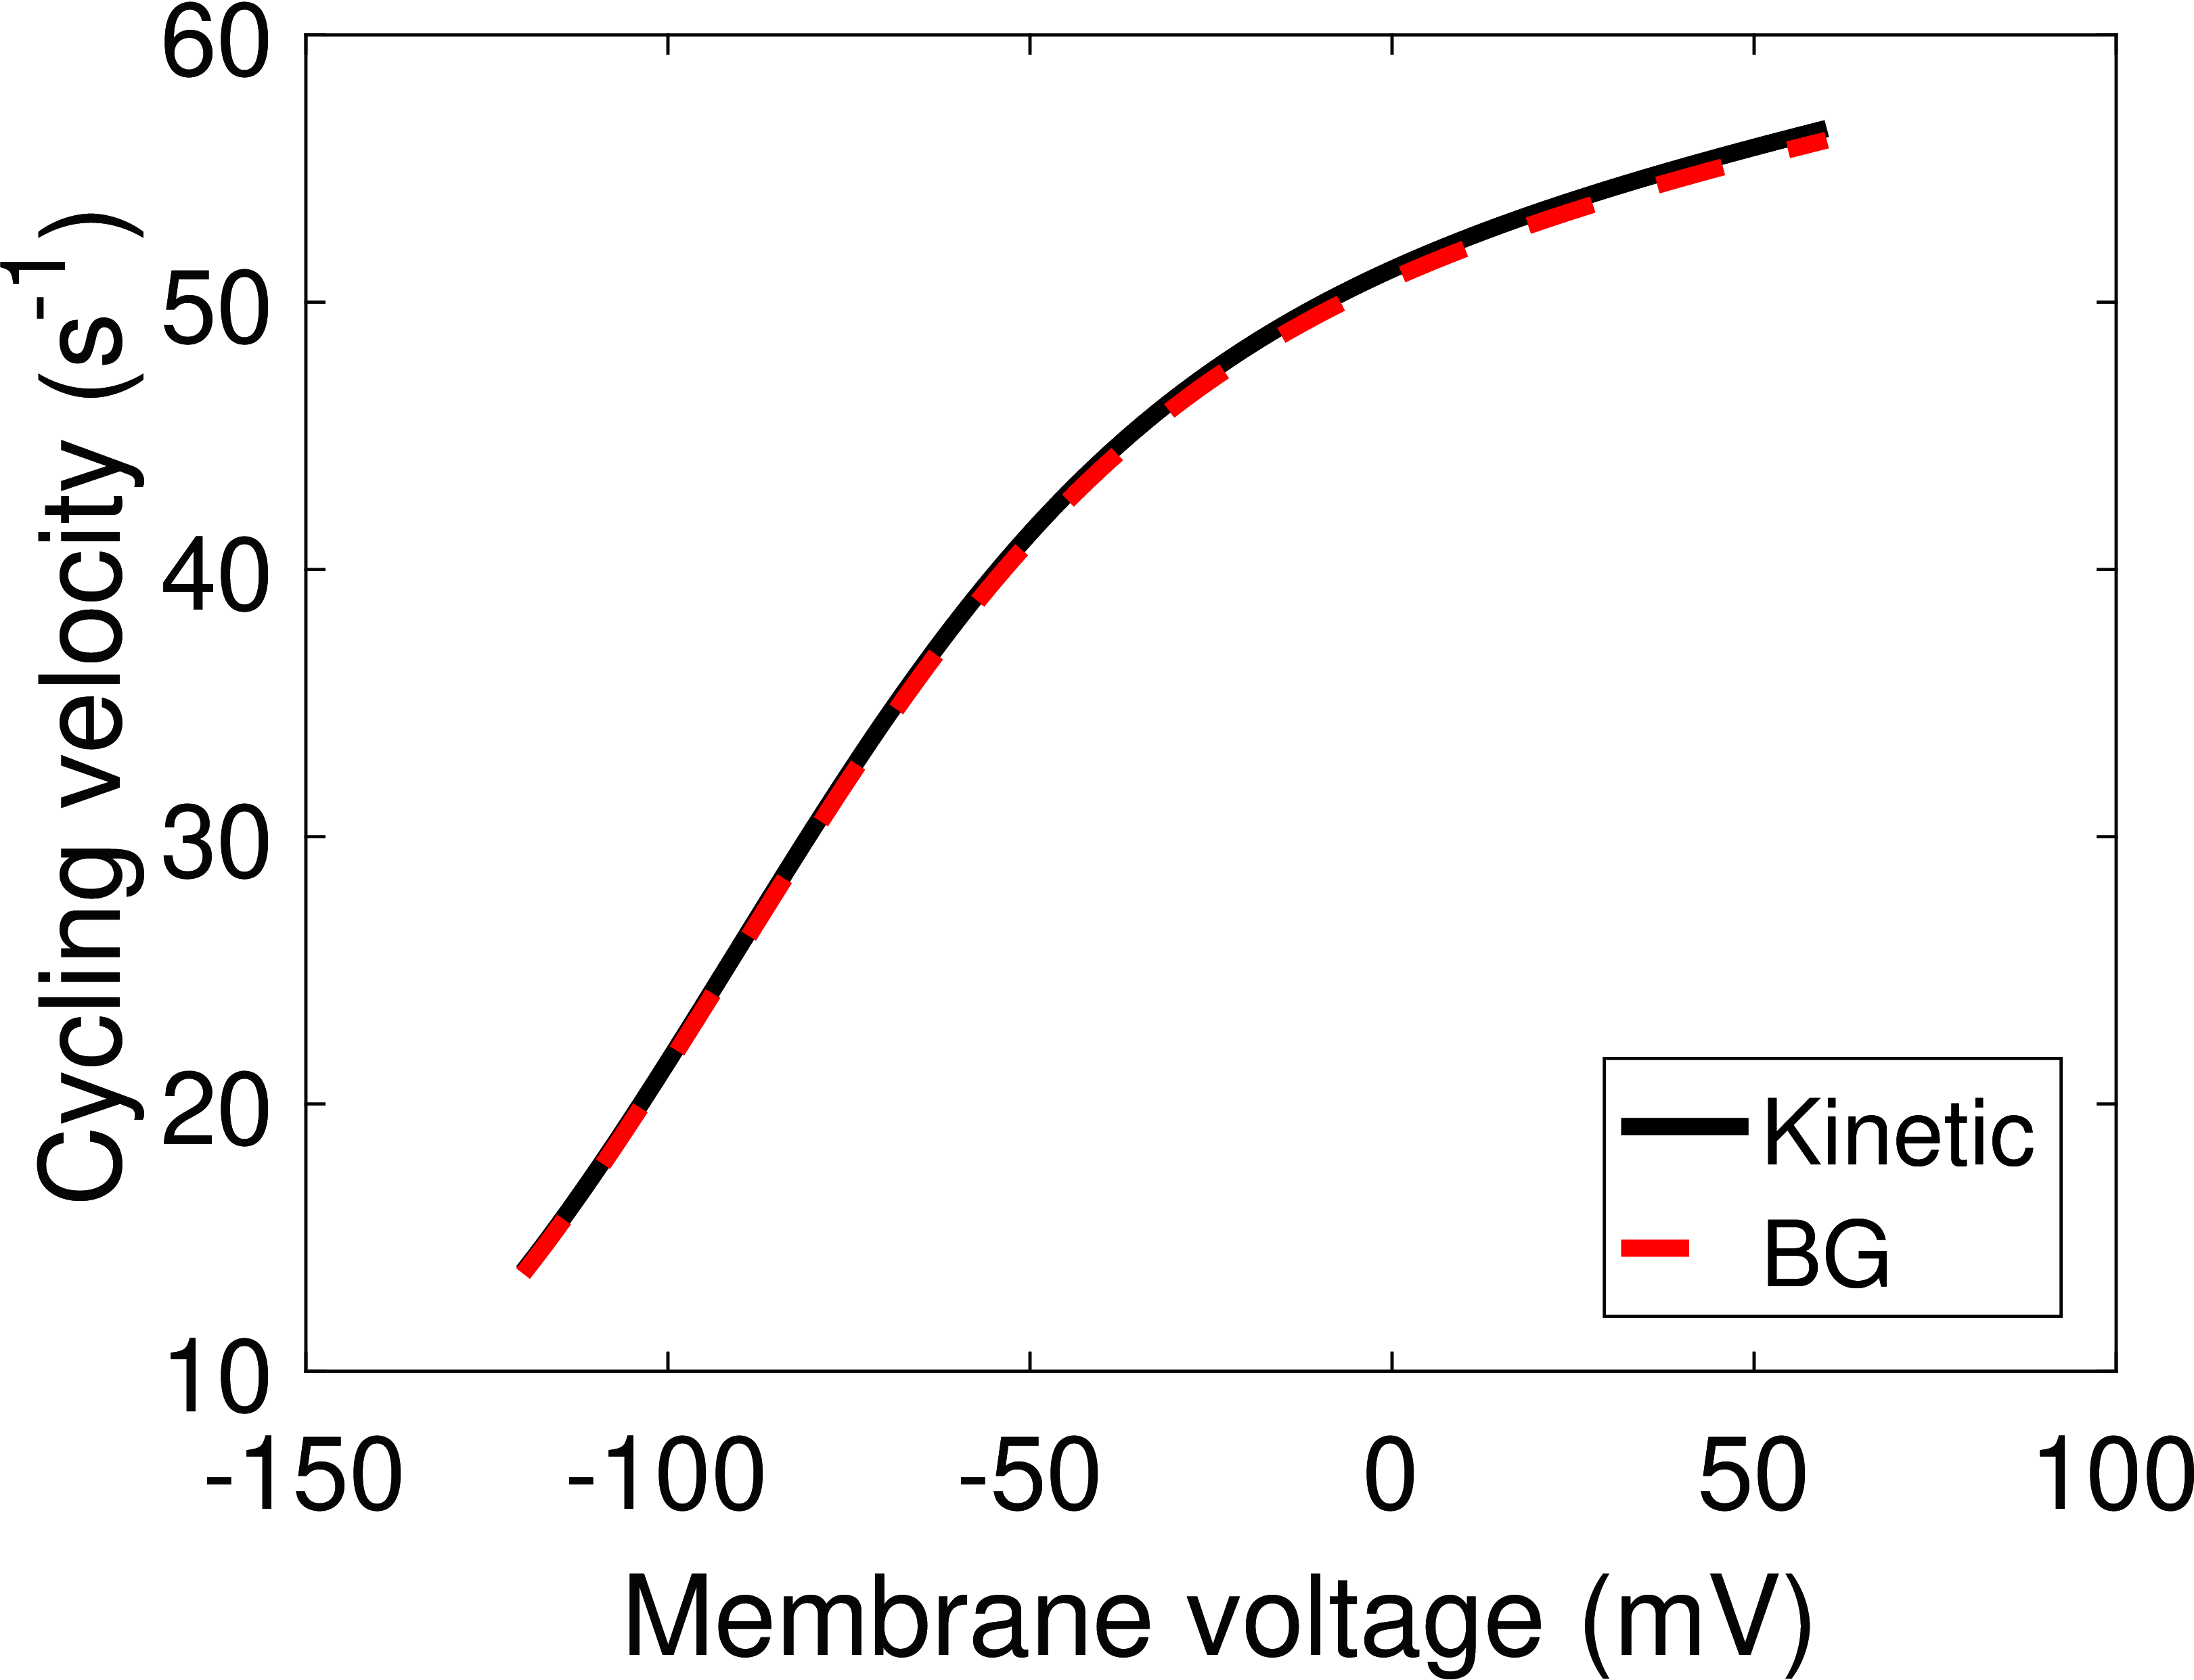 A comparison of the kinetic and bond graph cardiac Na^+/K^+ models. \mathrm{[Na^+]_i} = 50\si{mM}, \mathrm{[Na^+]_e} = 150\si{mM}, \mathrm{[K^+]_i} = 0\si{mM}, \mathrm{[K^+]_e} = 5.4\si{mM}, \mathrm{pH} = 7.4, \mathrm{[Pi]_{tot}} = 0\si{mM}, \mathrm{[MgATP]} = 10\si{mM}, \mathrm{[MgADP]} = 0\si{mM}, T = 310\si{K}. The bond graph model is formulated using concentration ratios thus zero concentrations were approximated by a concentration of 0.001mM to avoid numerical errors.